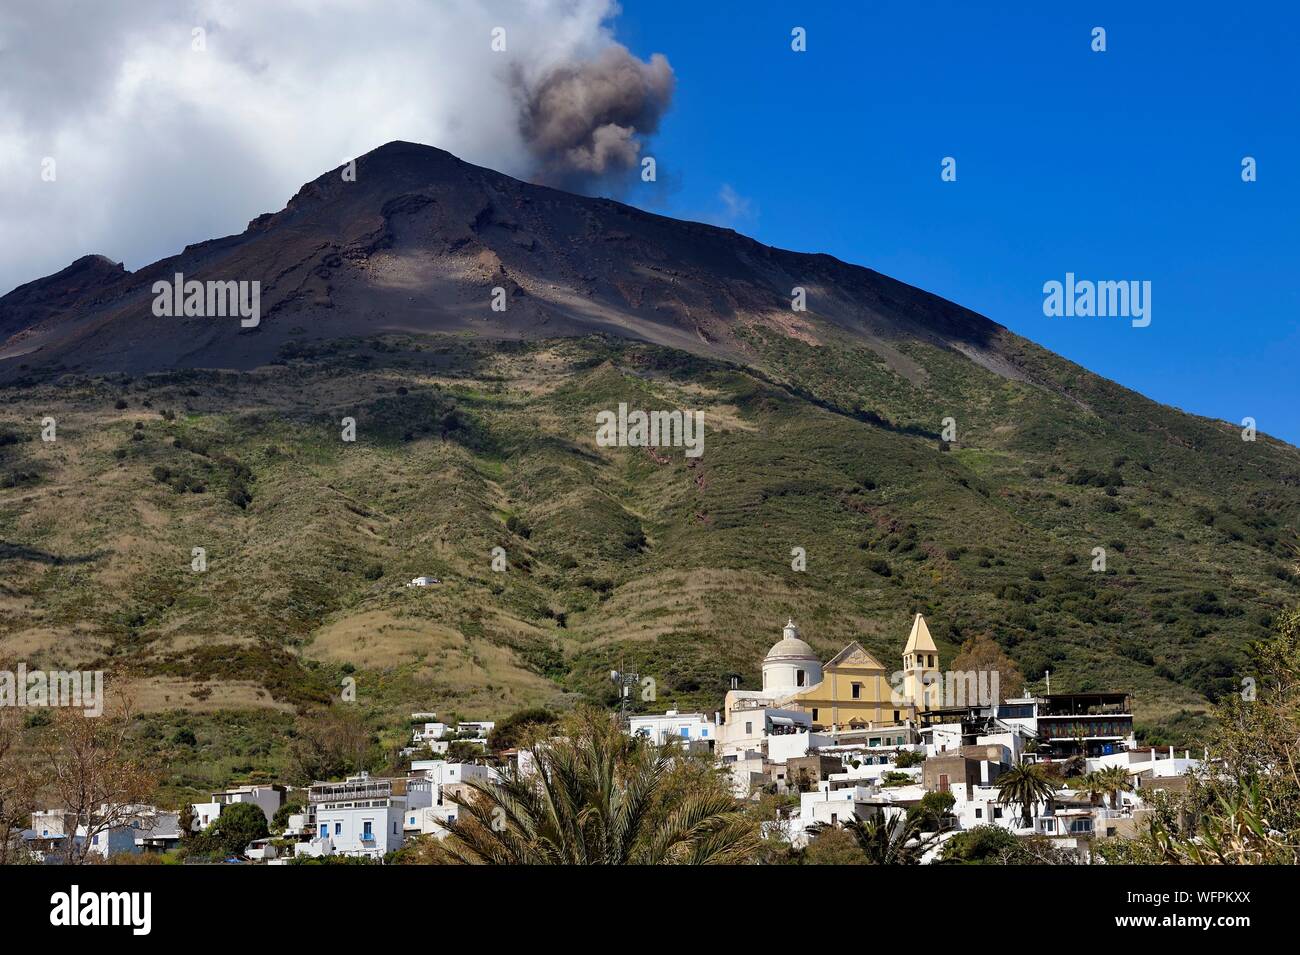 Italy, Sicily, Aeolian Islands, listed as World Heritage by UNESCO, Stromboli island, one of the multiple and regular eruptions of the Stromboli volcano which rises to 924m, Chiesa di San Vincenzo (St. Vincent Church) in the village of Stromboli in the foreground Stock Photo